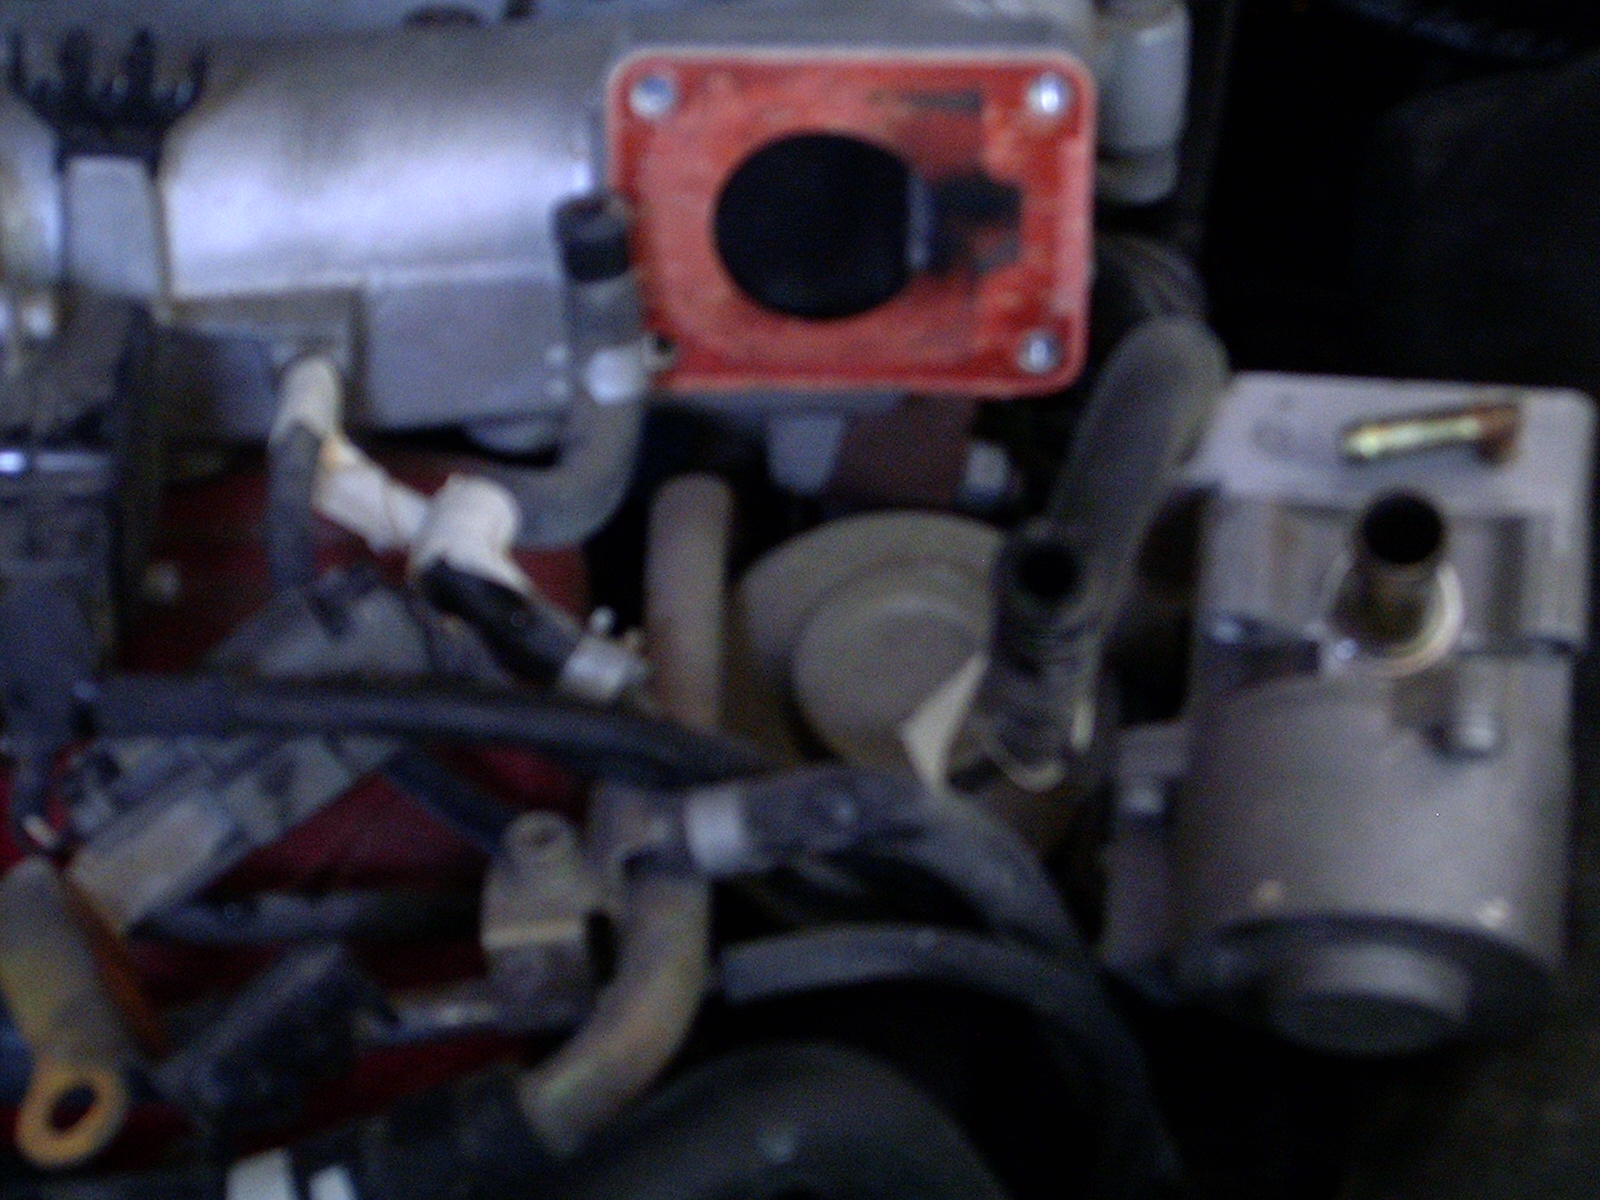 95 Nissan maxima fuel injector removal #9